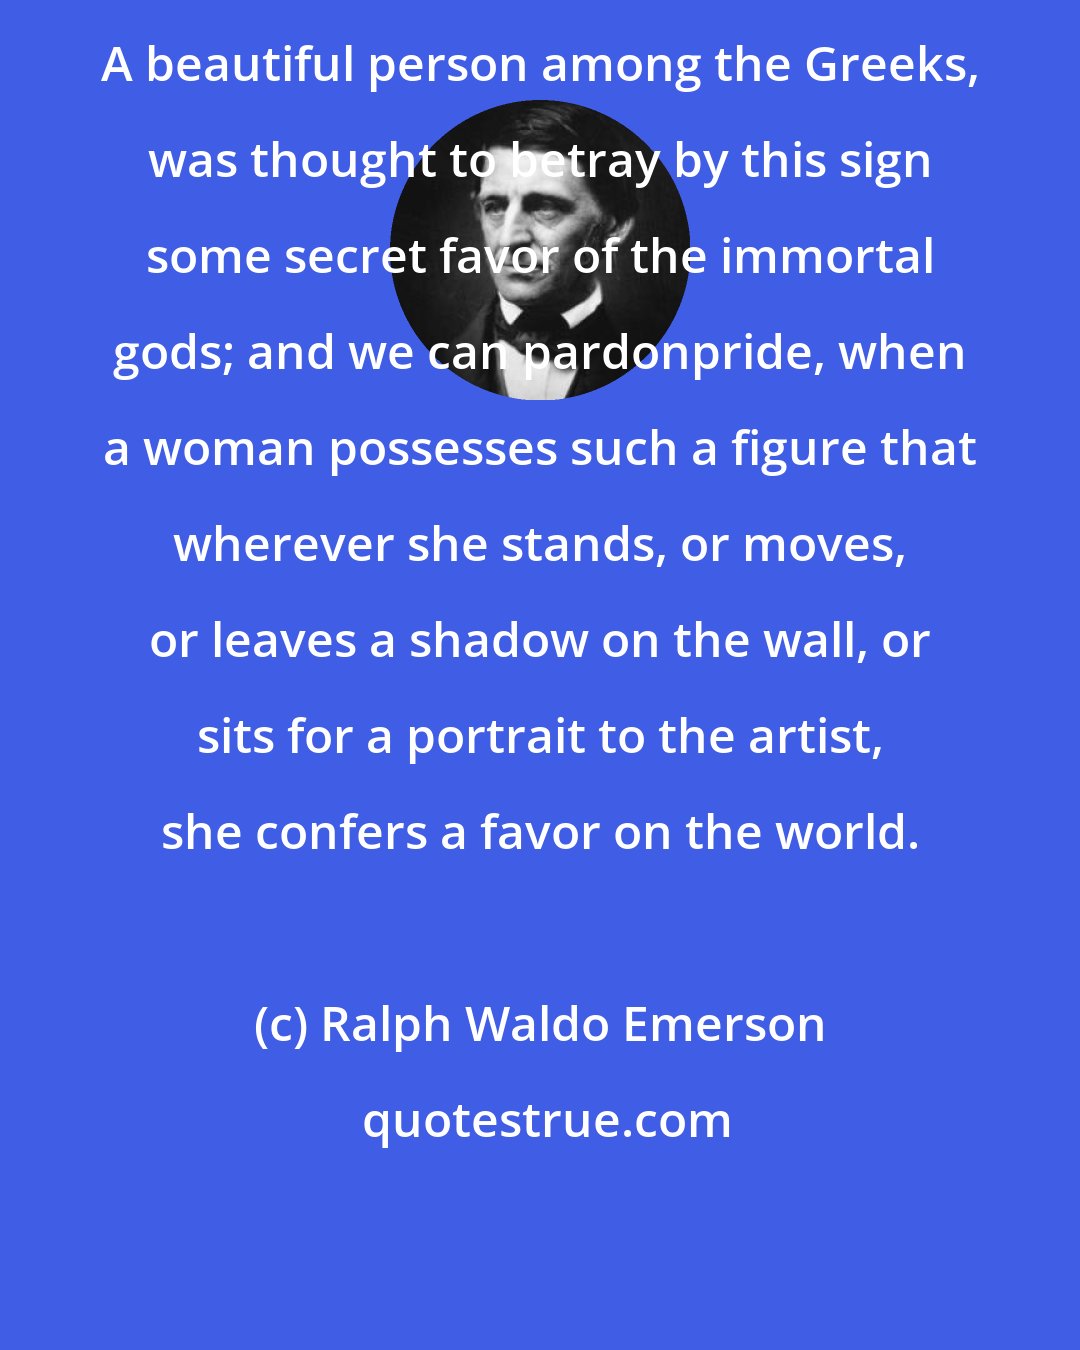 Ralph Waldo Emerson: A beautiful person among the Greeks, was thought to betray by this sign some secret favor of the immortal gods; and we can pardonpride, when a woman possesses such a figure that wherever she stands, or moves, or leaves a shadow on the wall, or sits for a portrait to the artist, she confers a favor on the world.